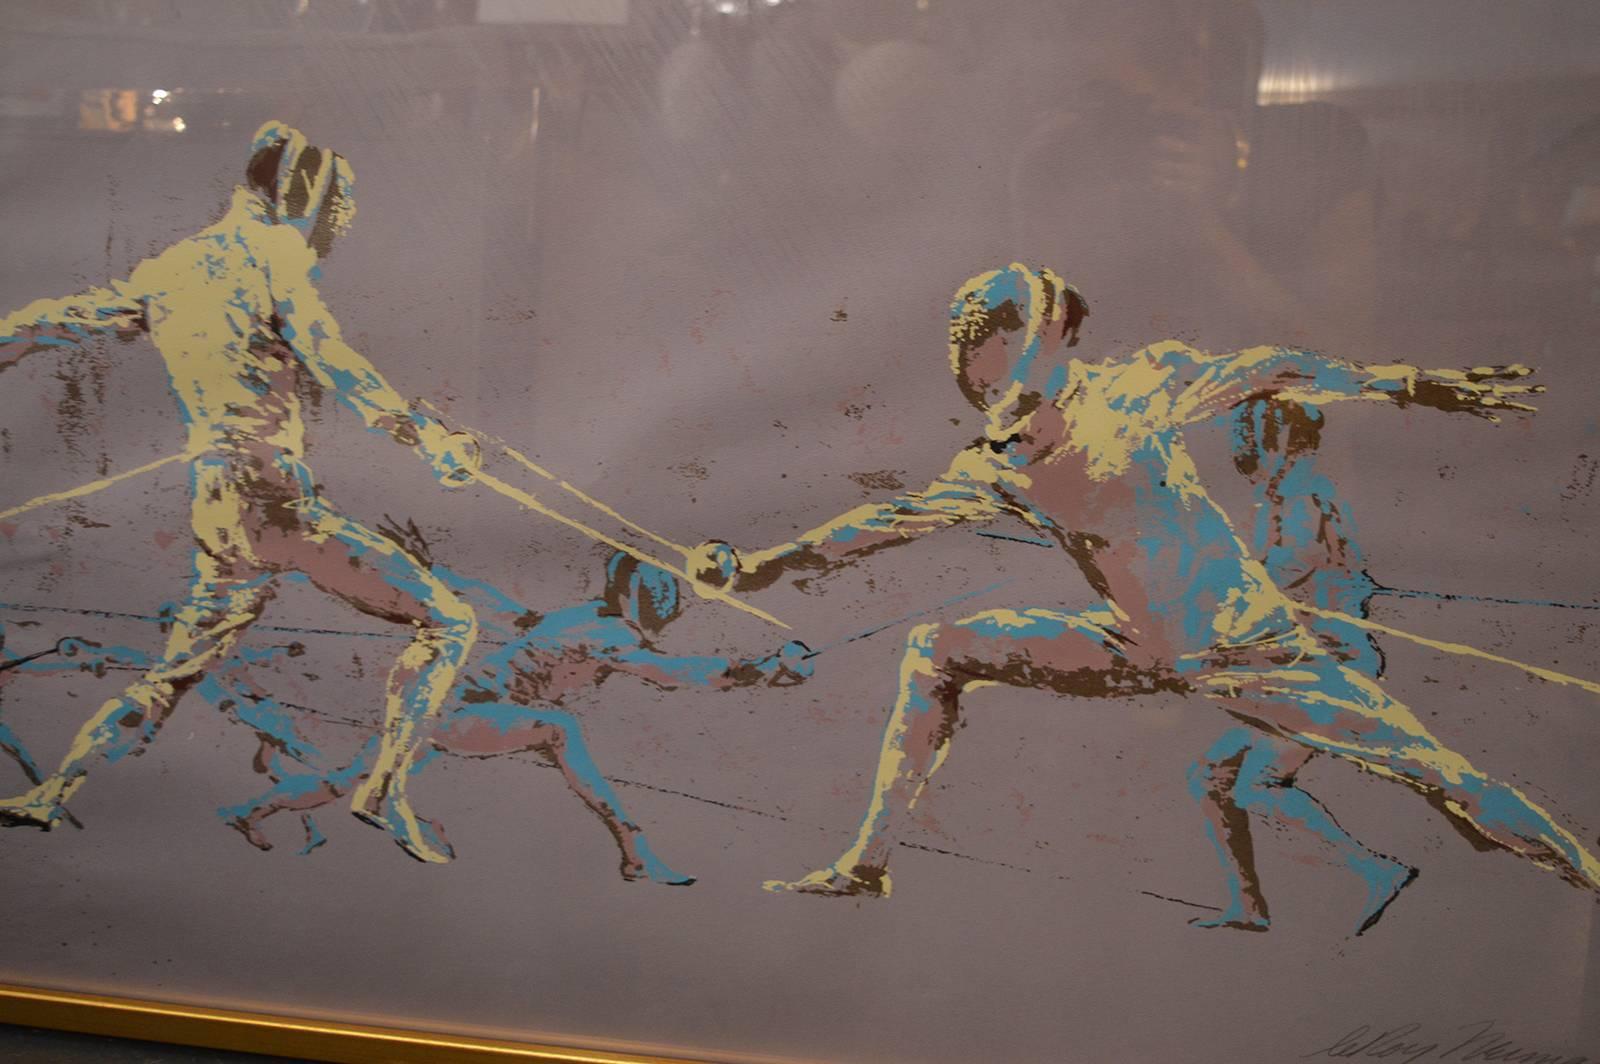 Leroy Neiman fencers print. Signature and edition are in pencil on the print 38/175.